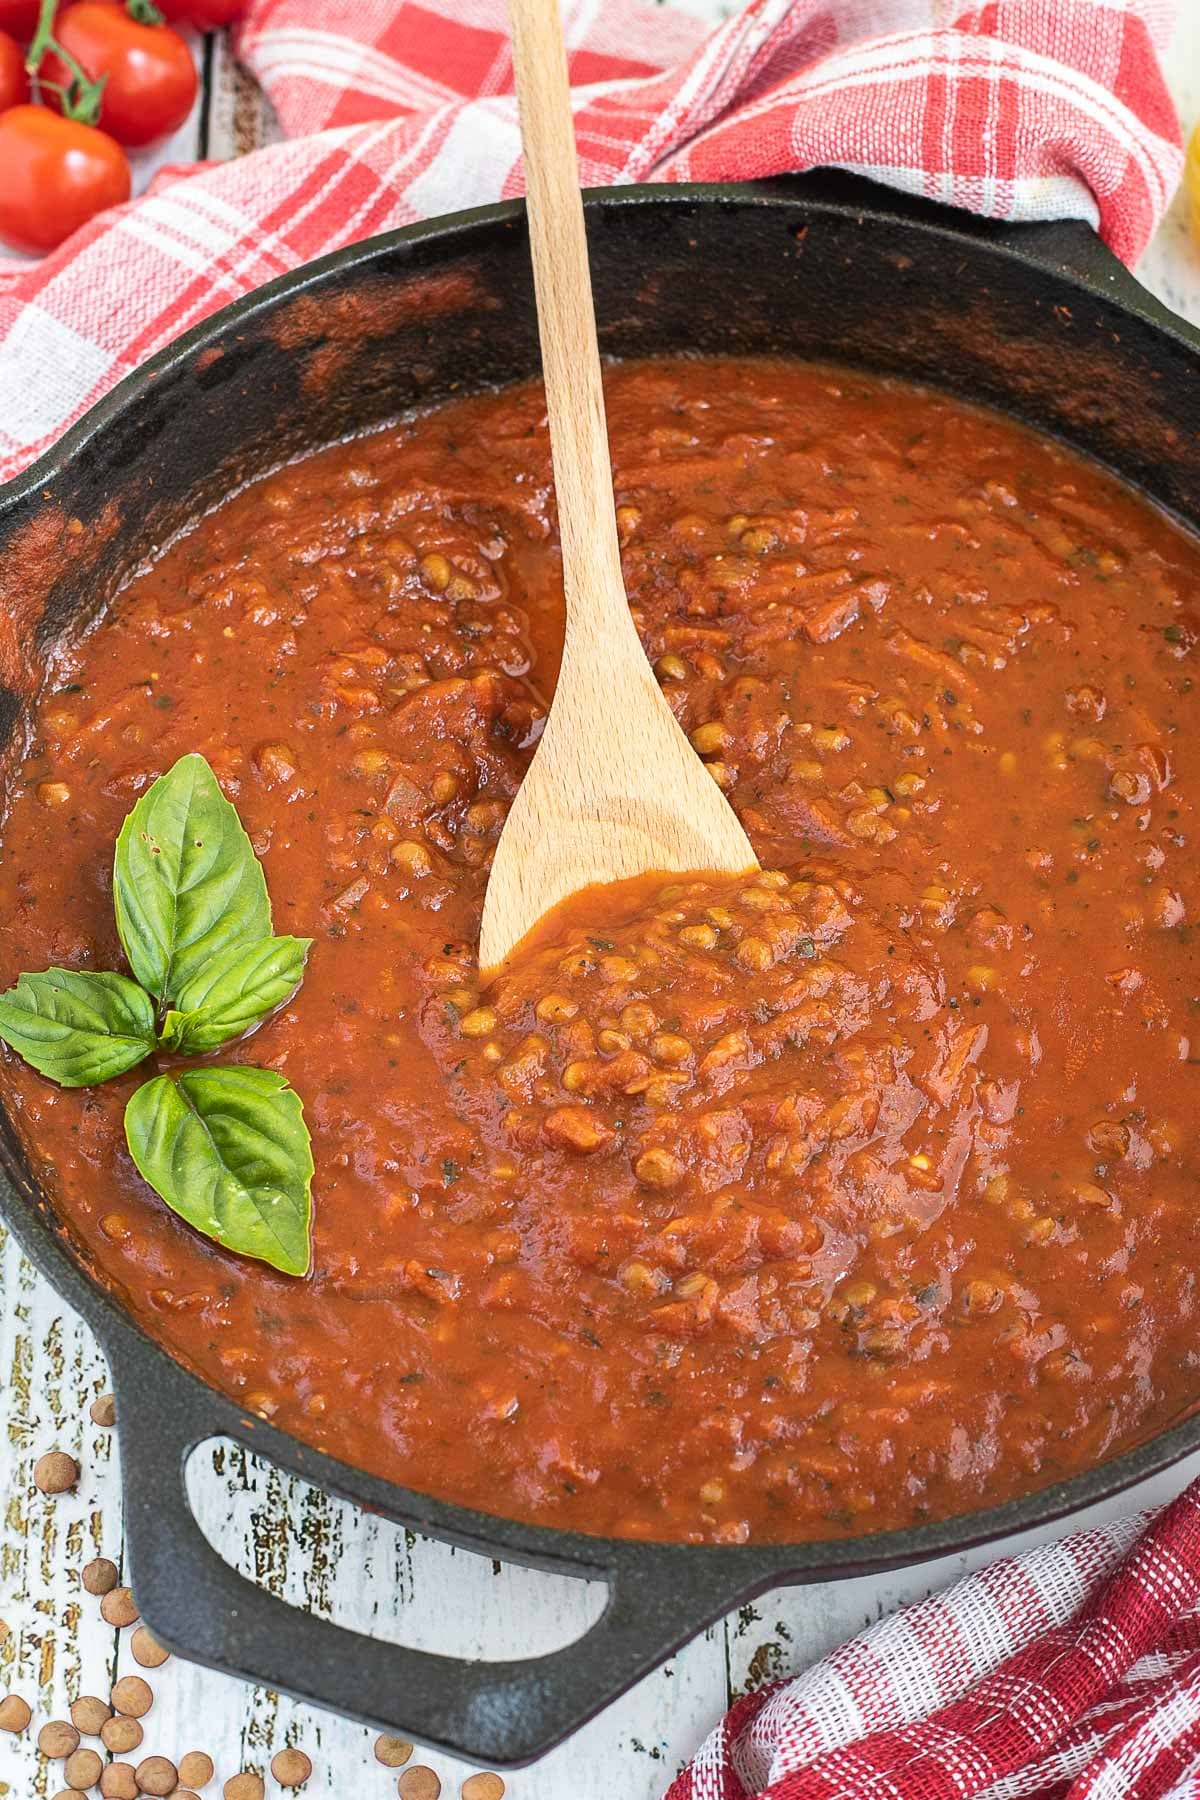 A cast iron skillet with brown lentils in bolognese sauce. Dry lentils, dry pasta and some cherry tomatoes are scattered around the skillet. A wooden spatula is placed in the middle of the sauce.